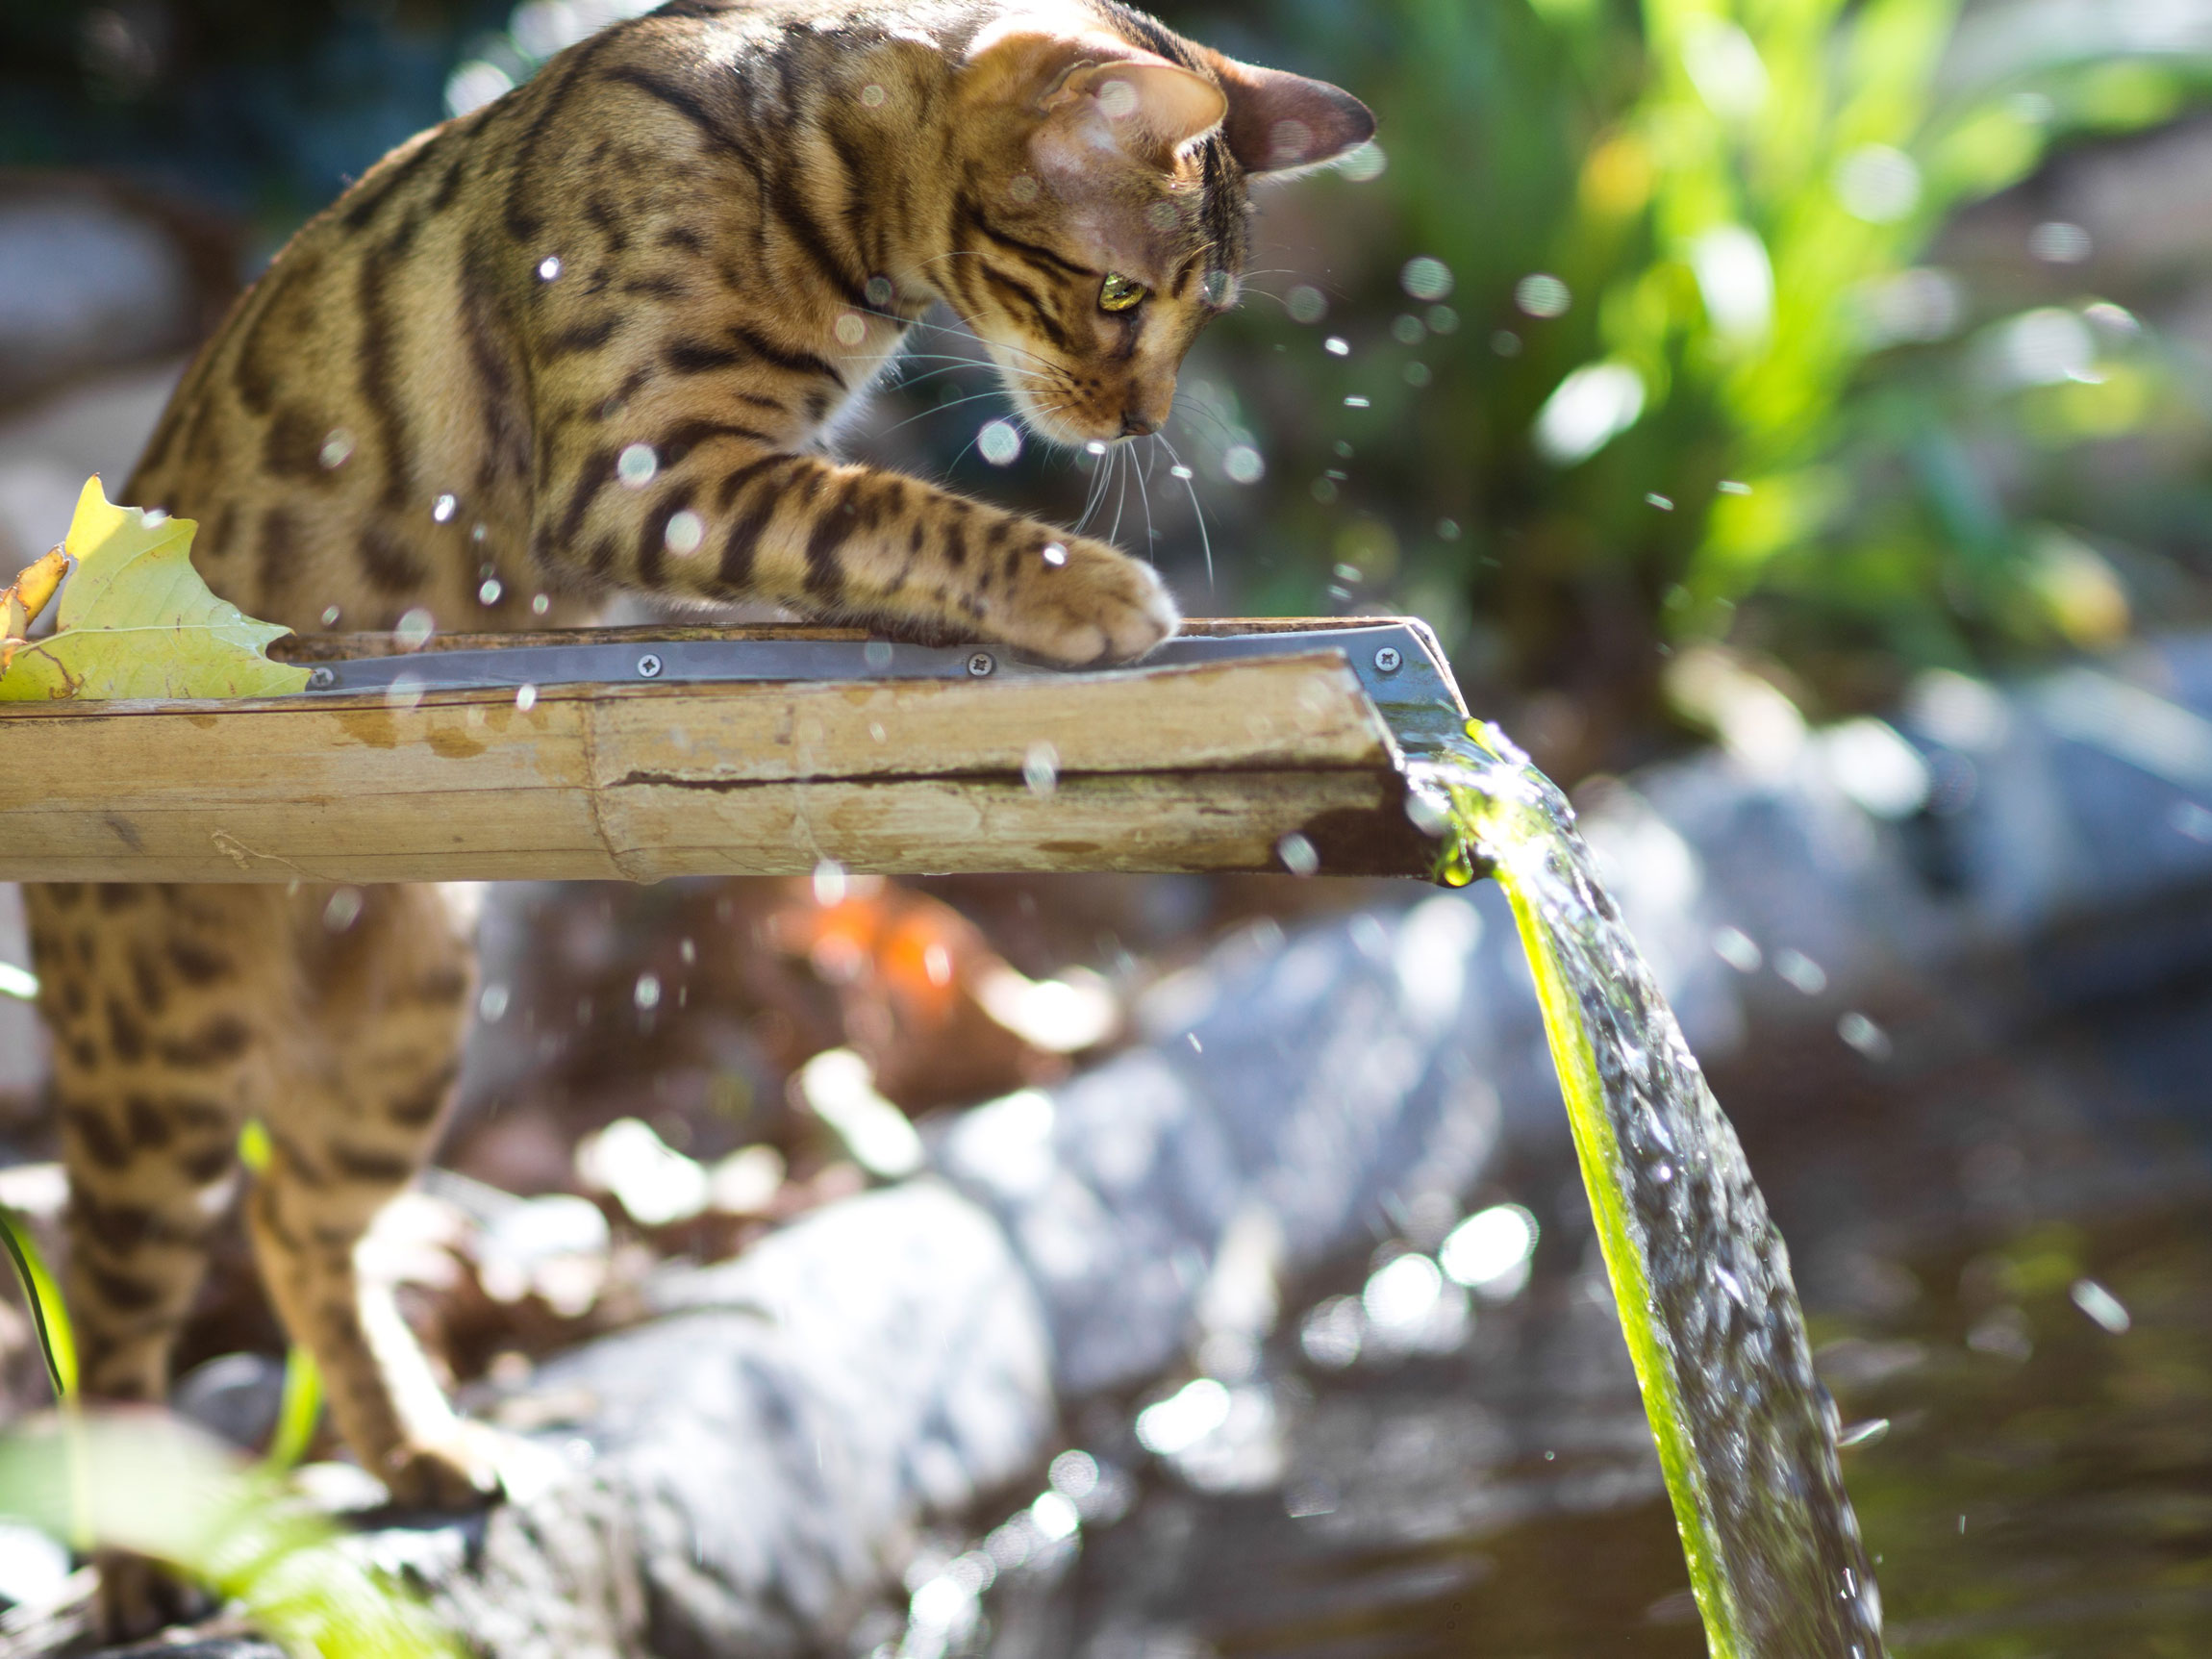 A Bengal cat playing with running water in the garden.